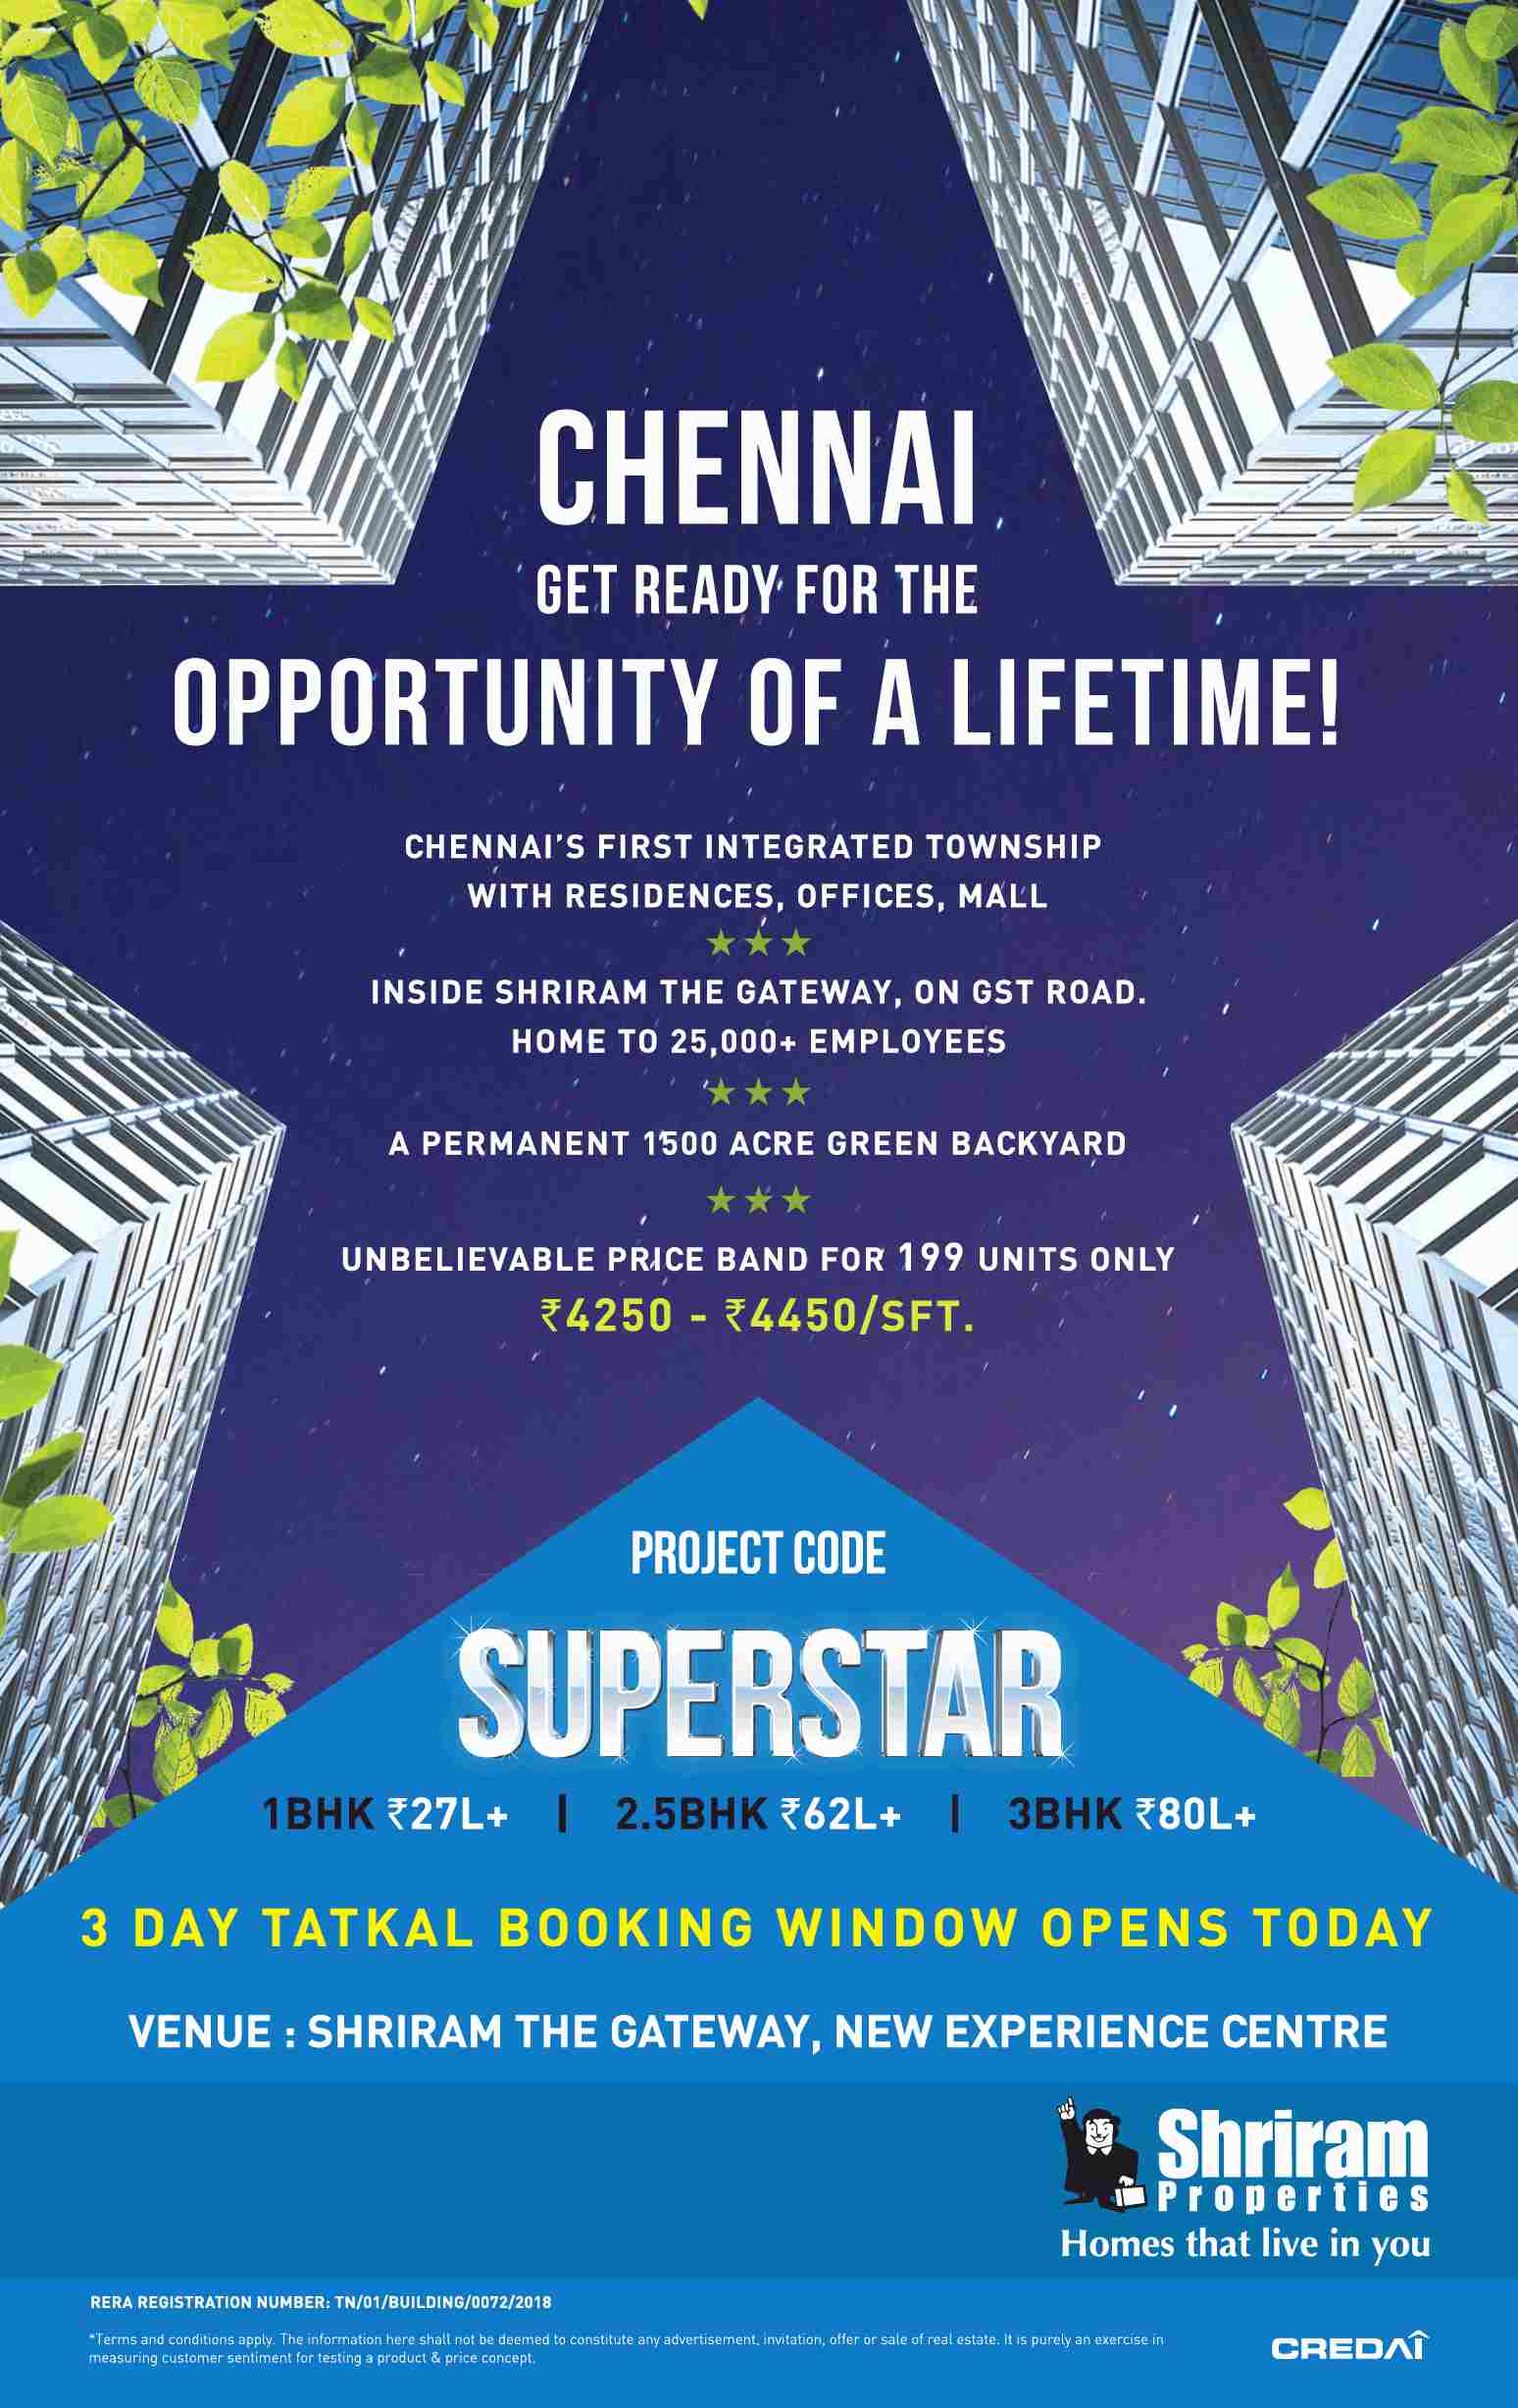 3 days tatkal booking window opens with project code Superstar at Shriram Home in Chennai